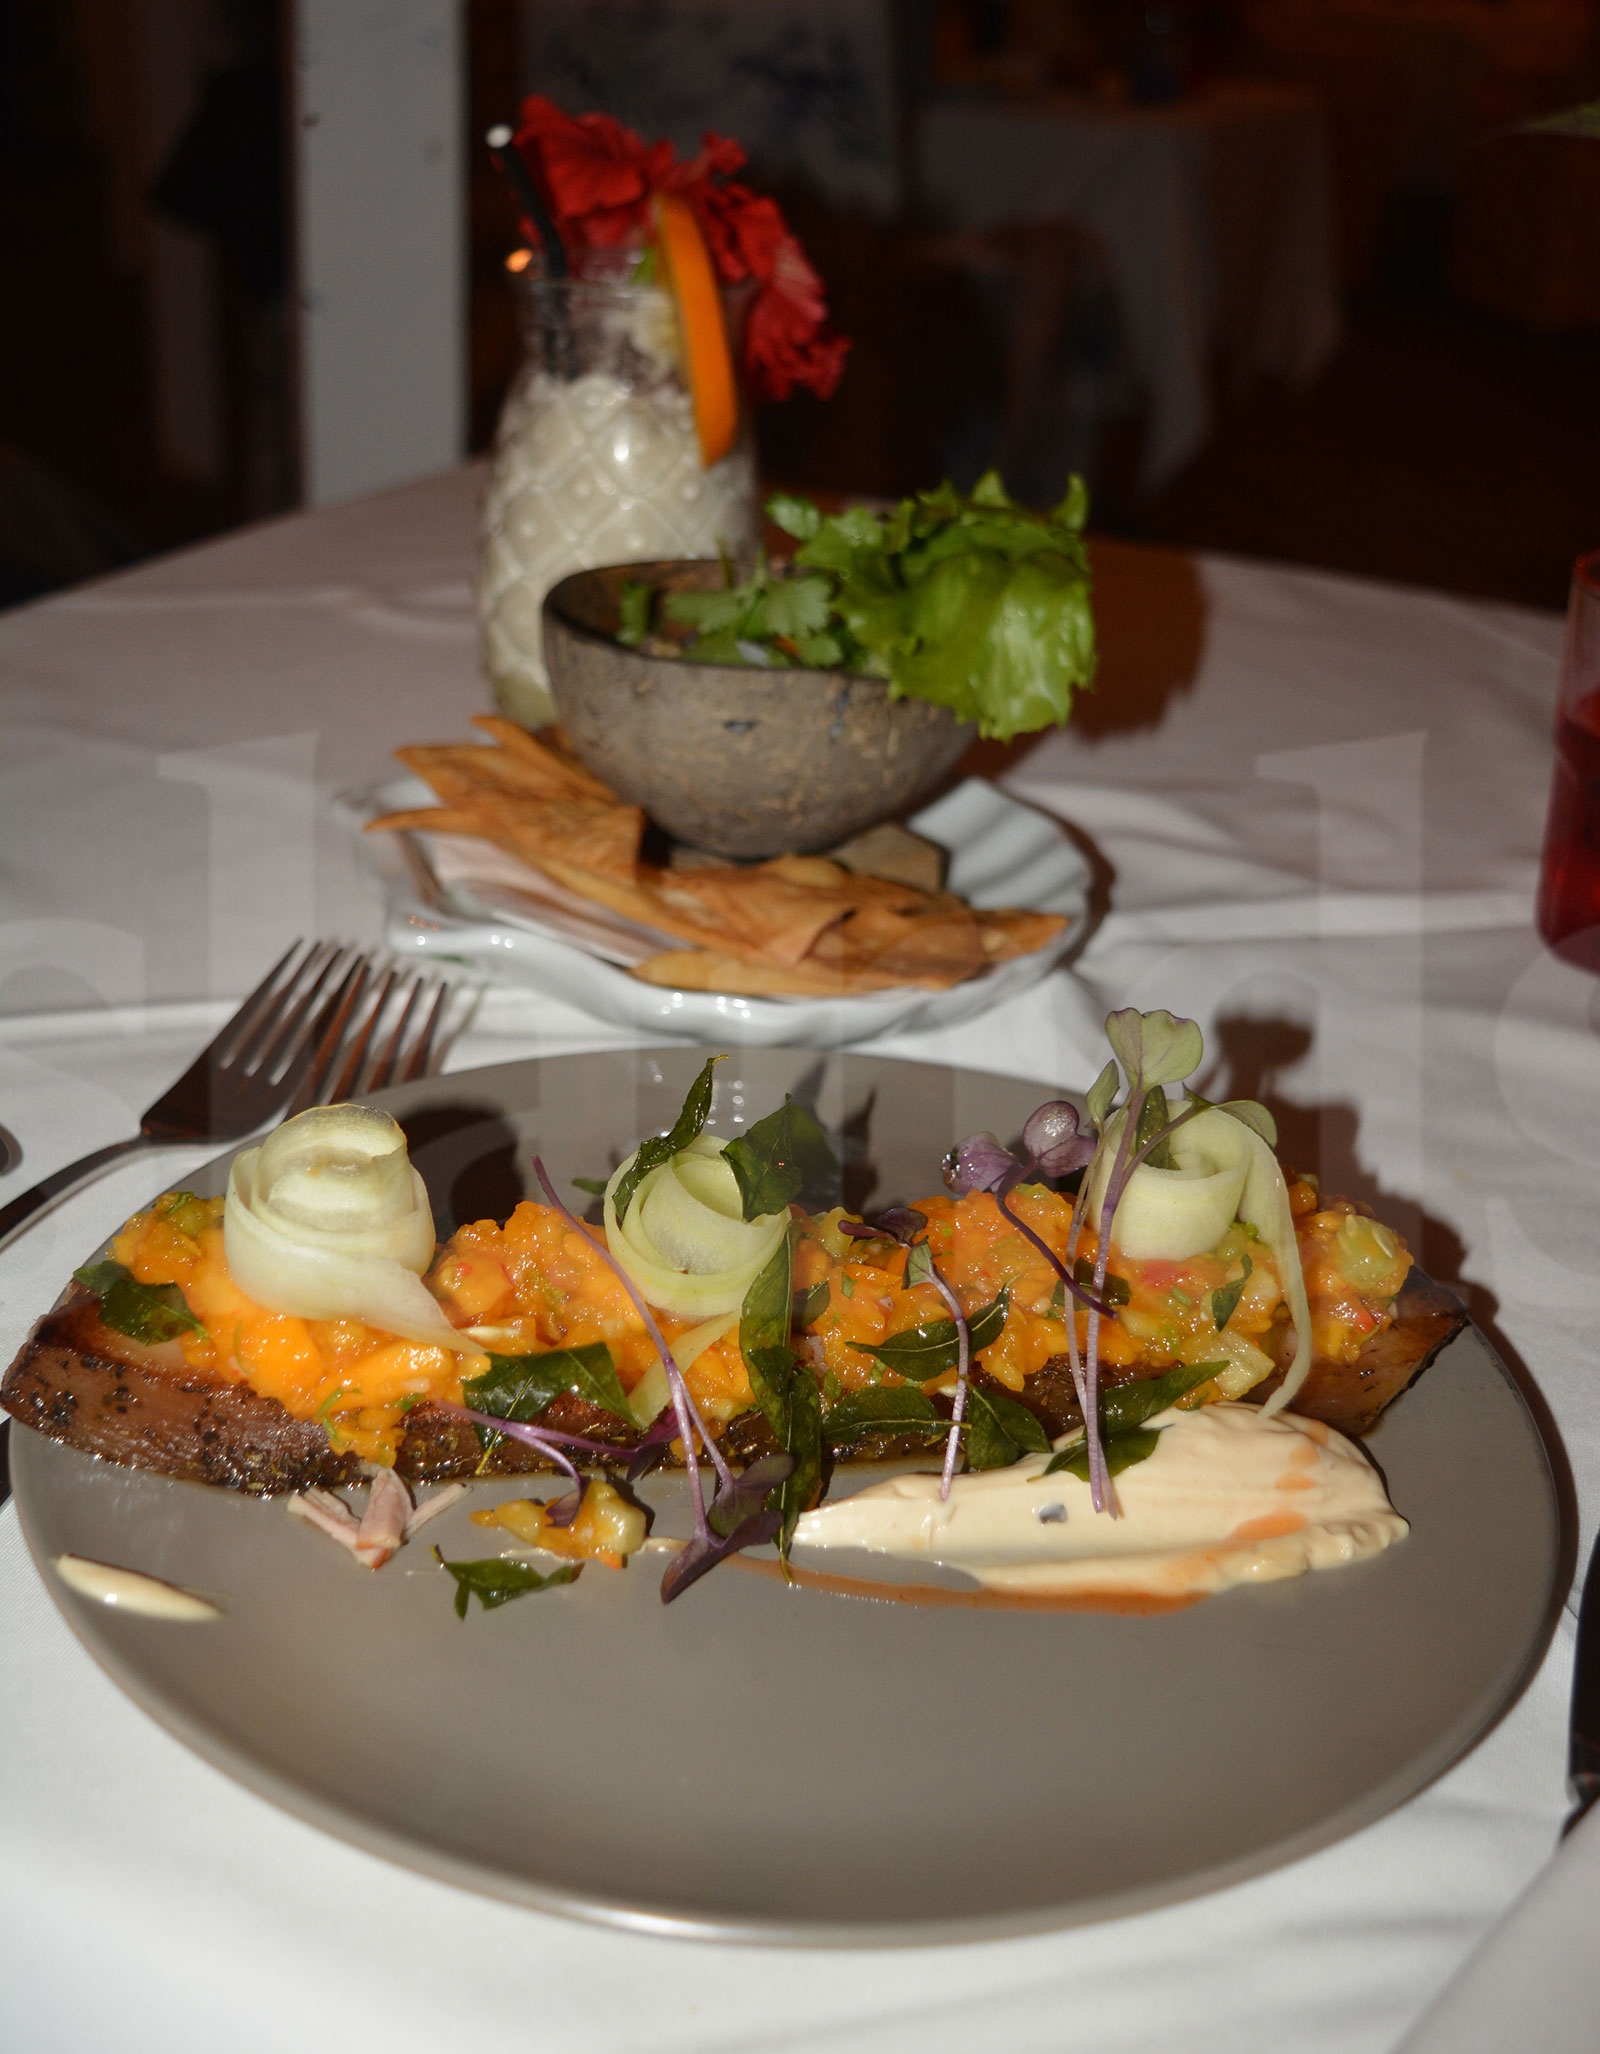 Tamarind House – compliments to the chef and team